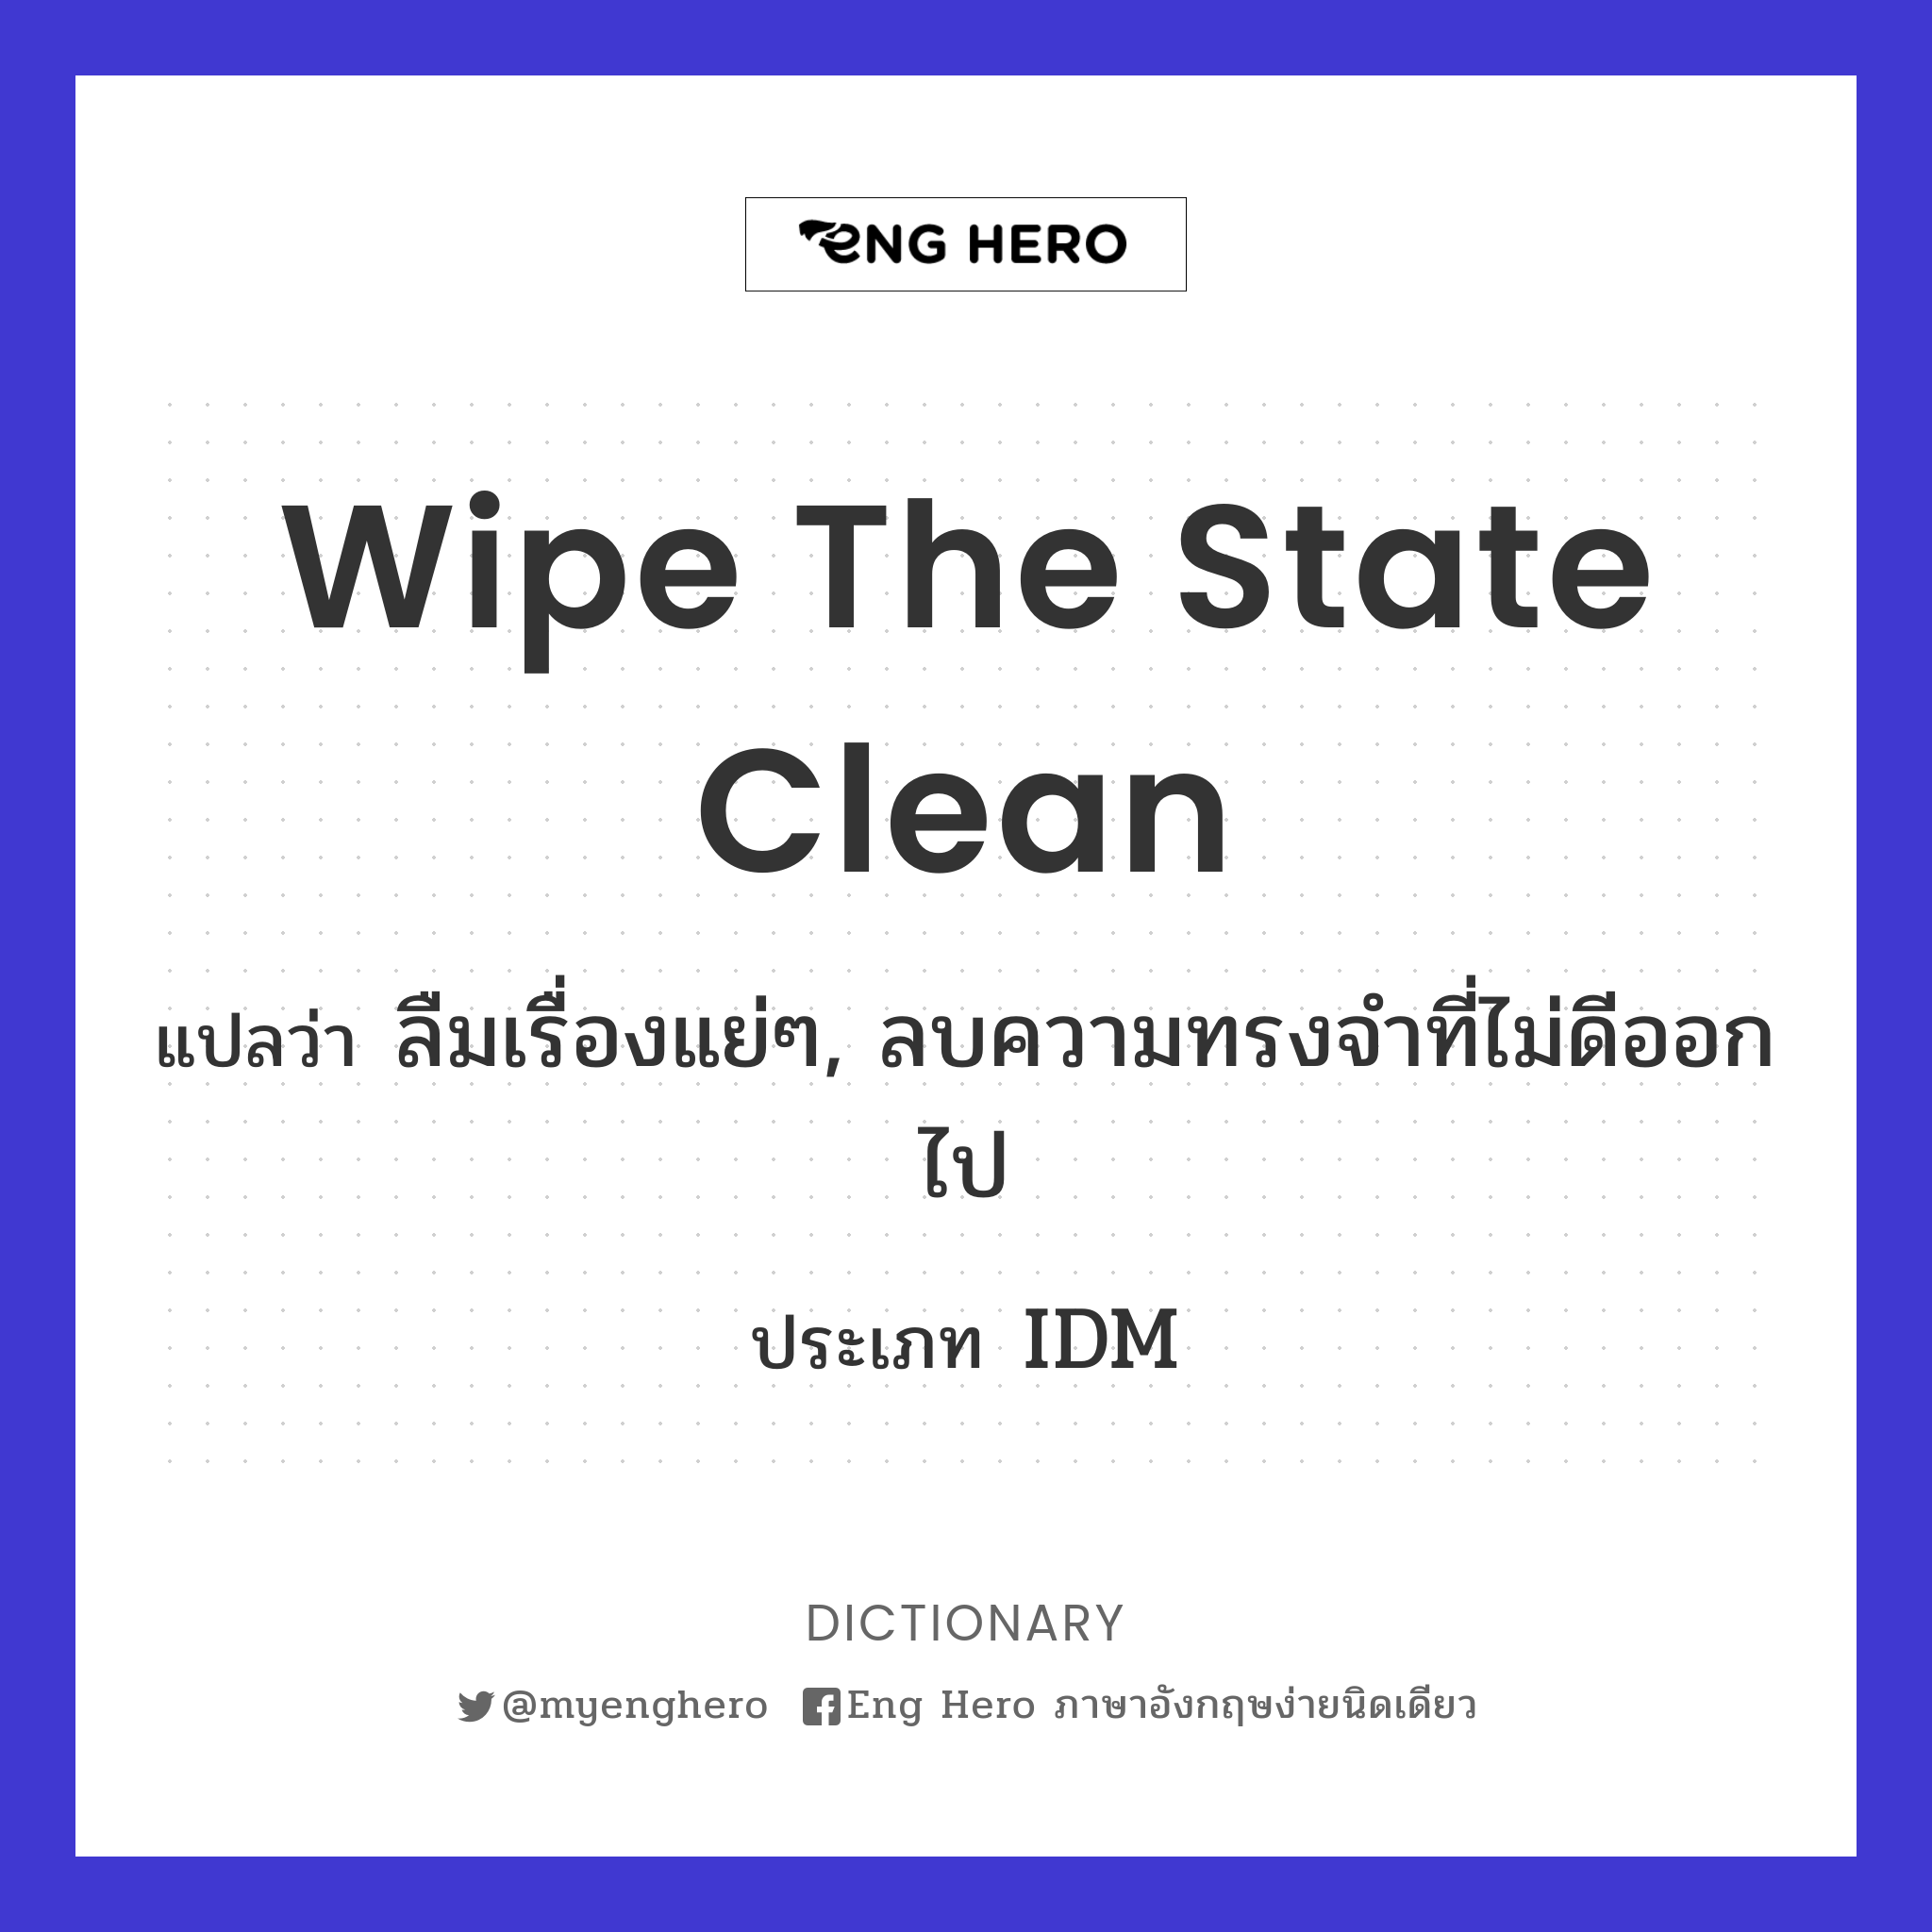 wipe the state clean